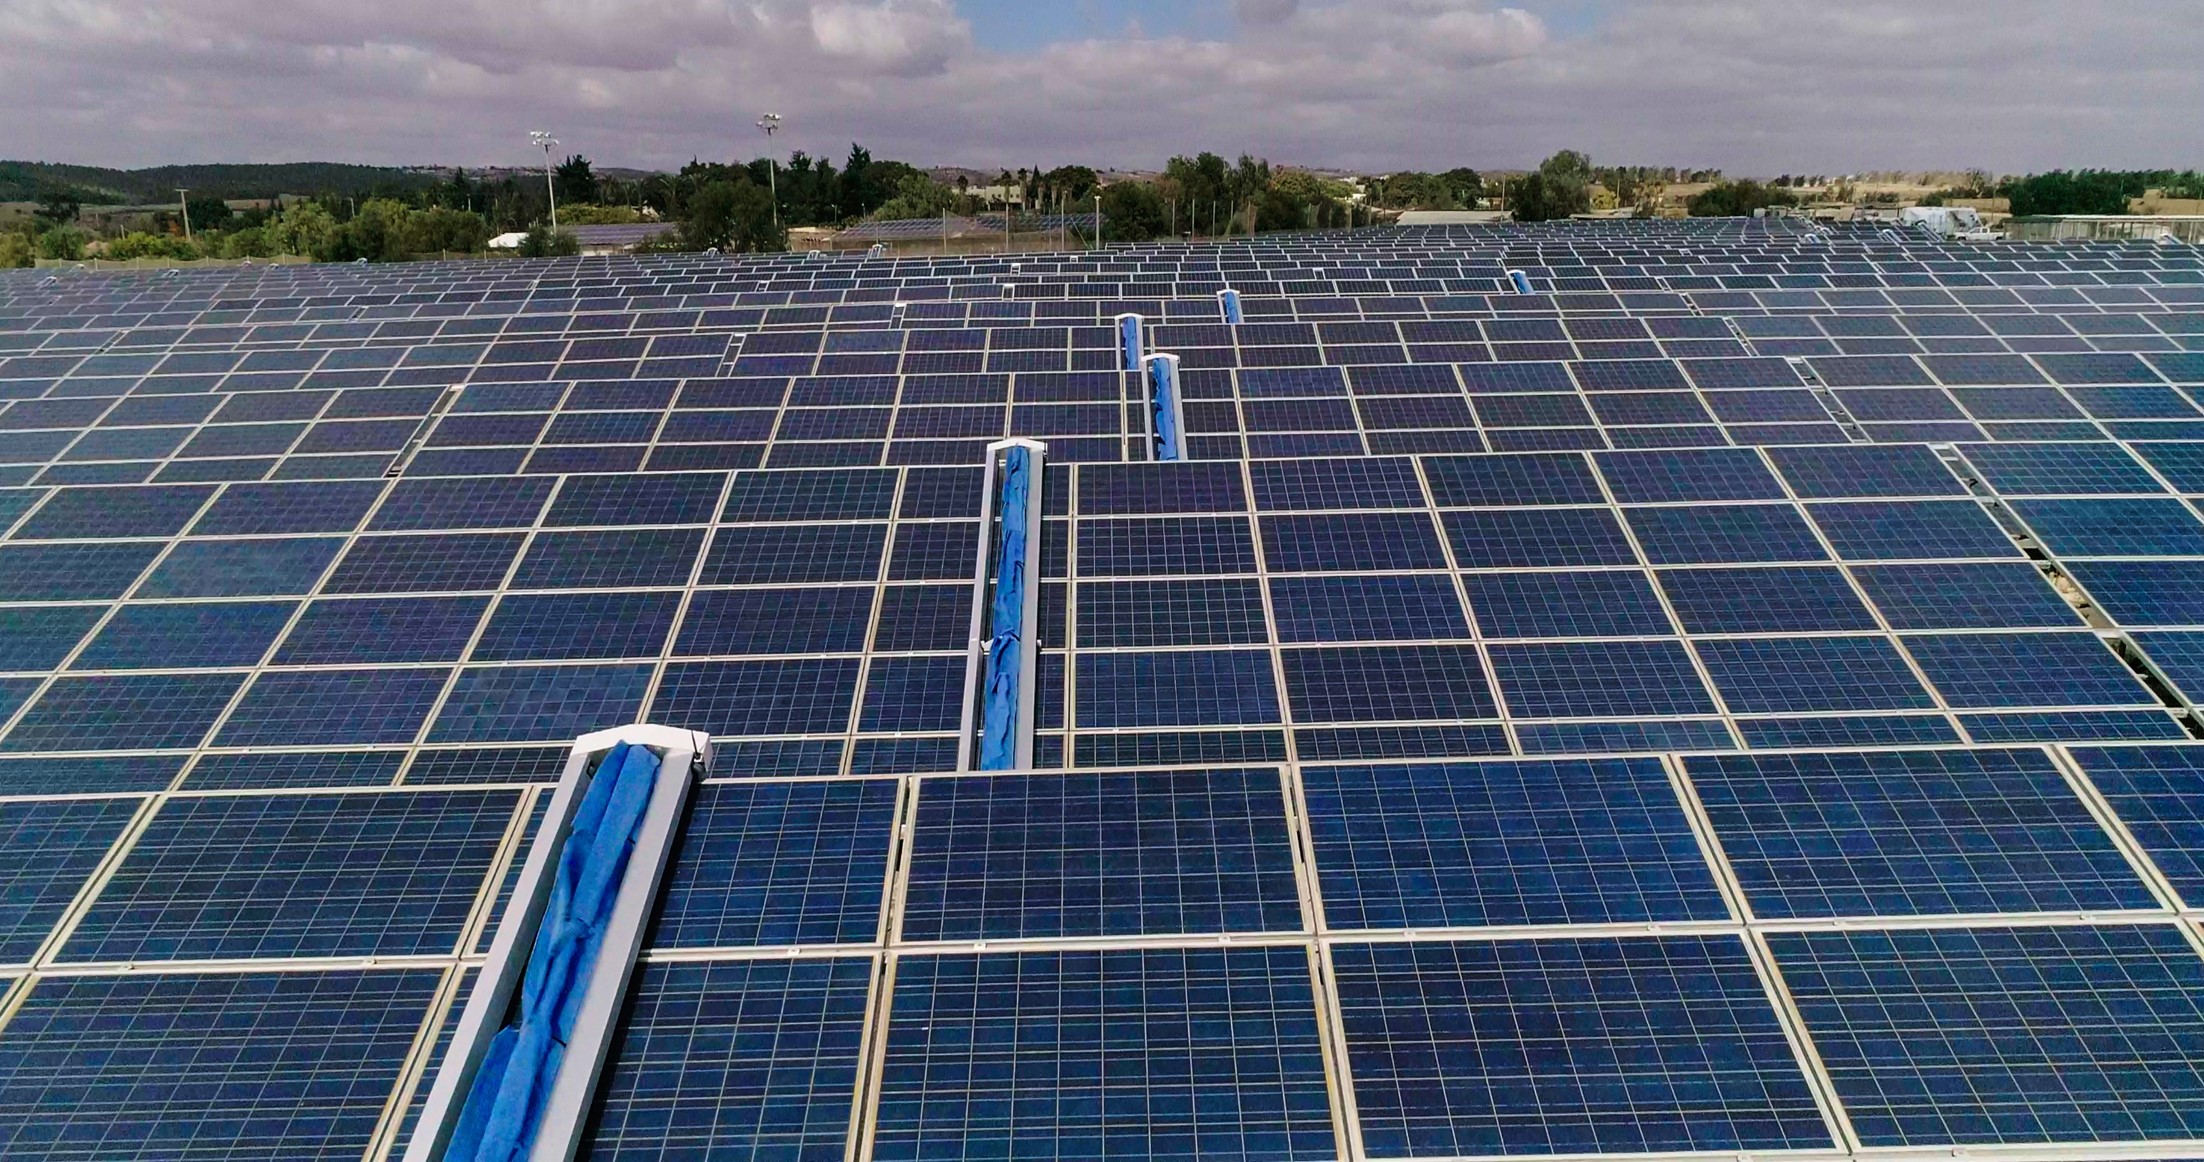 Robotic PV Panel Cleaning Firm Airtouch Solar Signs Agreement with ReNew Power